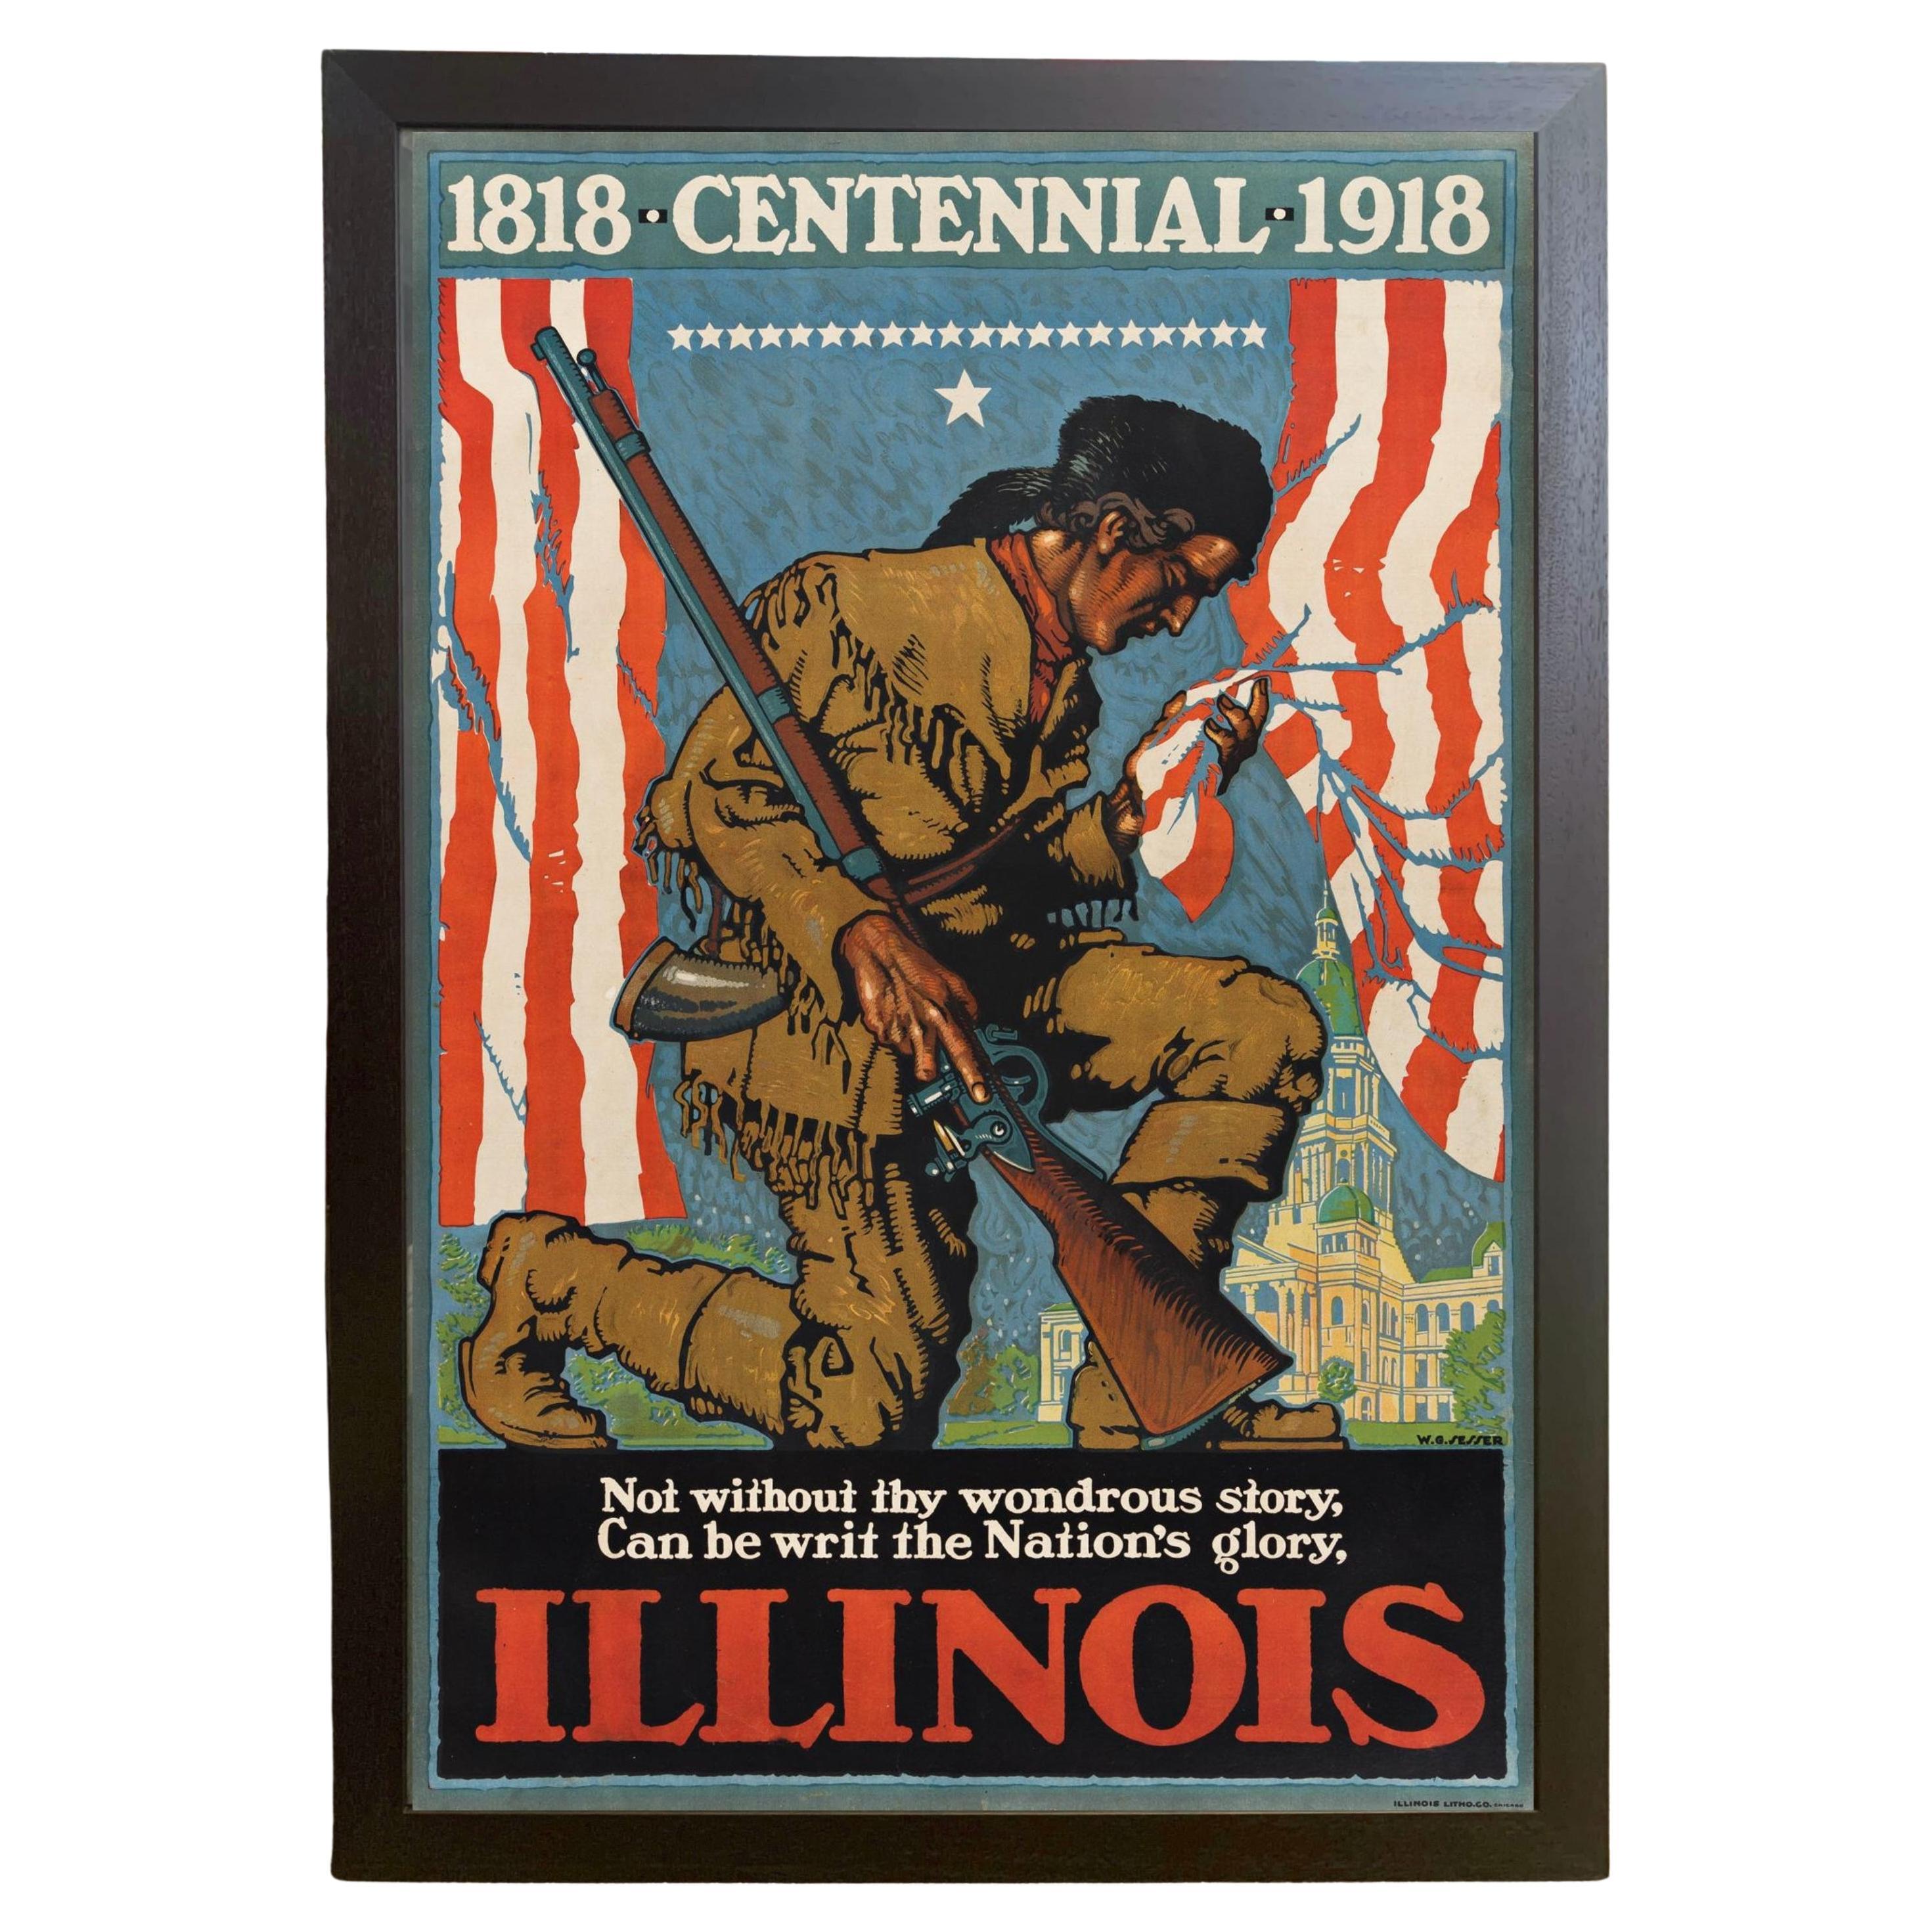 "Illinois. 1818 Centennial 1918." Vintage Poster by Willy Sesser, 1918